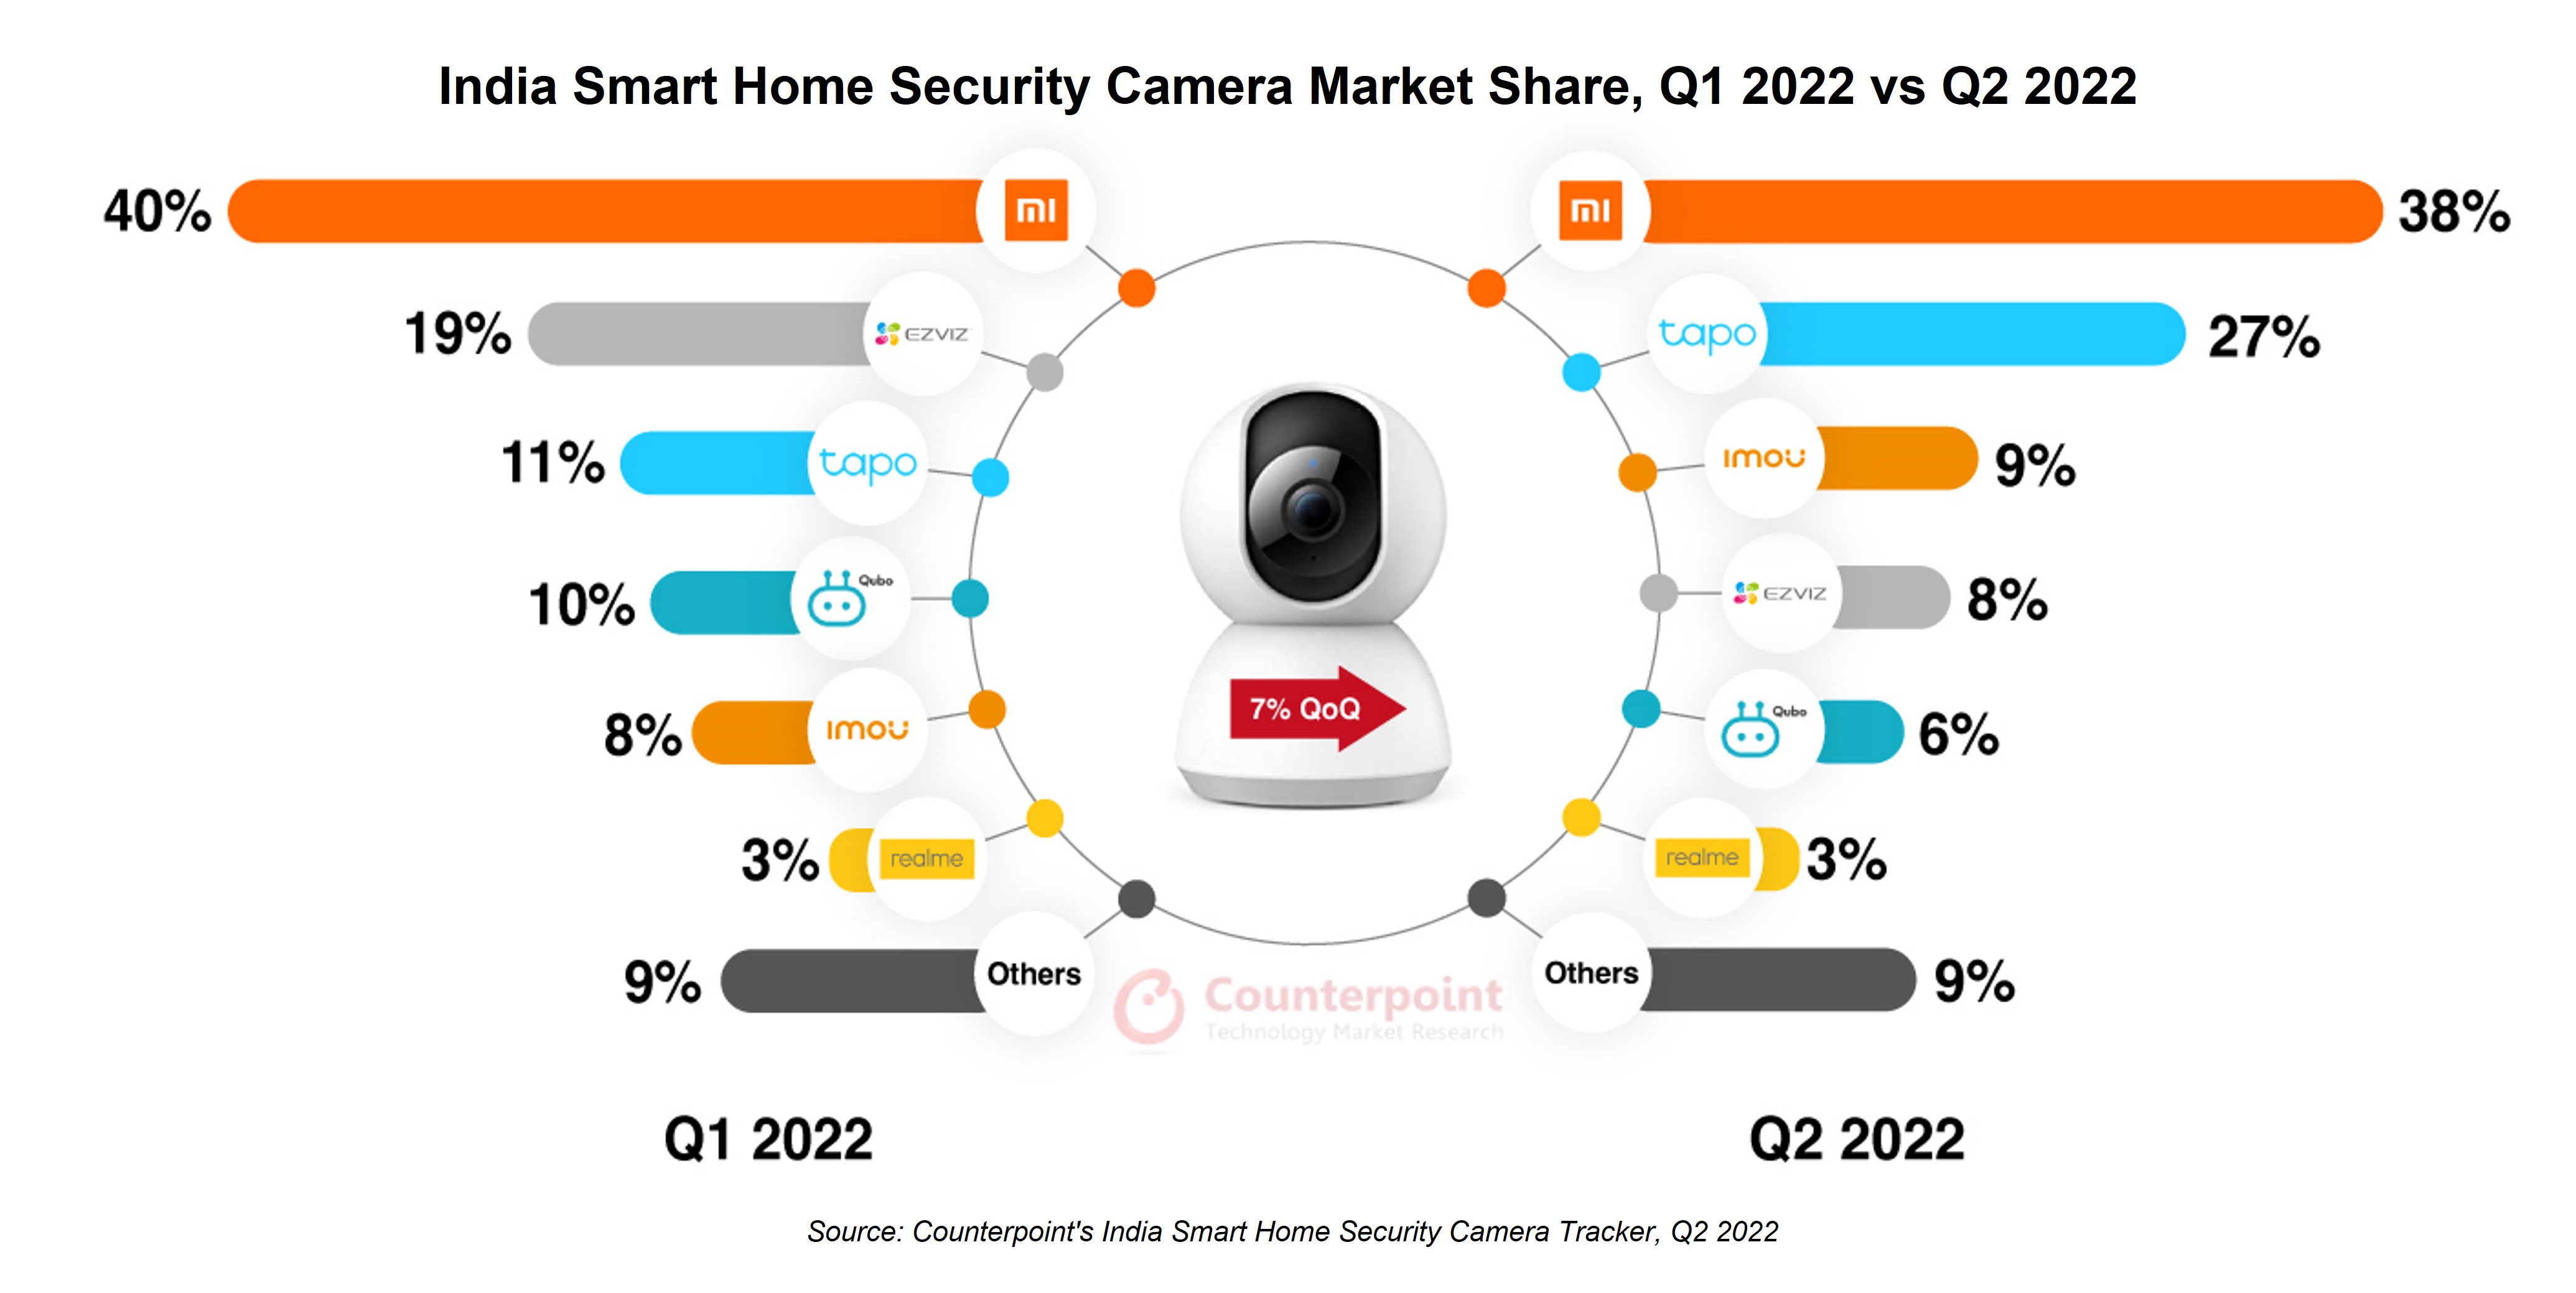 India Smart Home Security Camera Share, Q1 2022 vs Q2 2022, Counterpoint Research